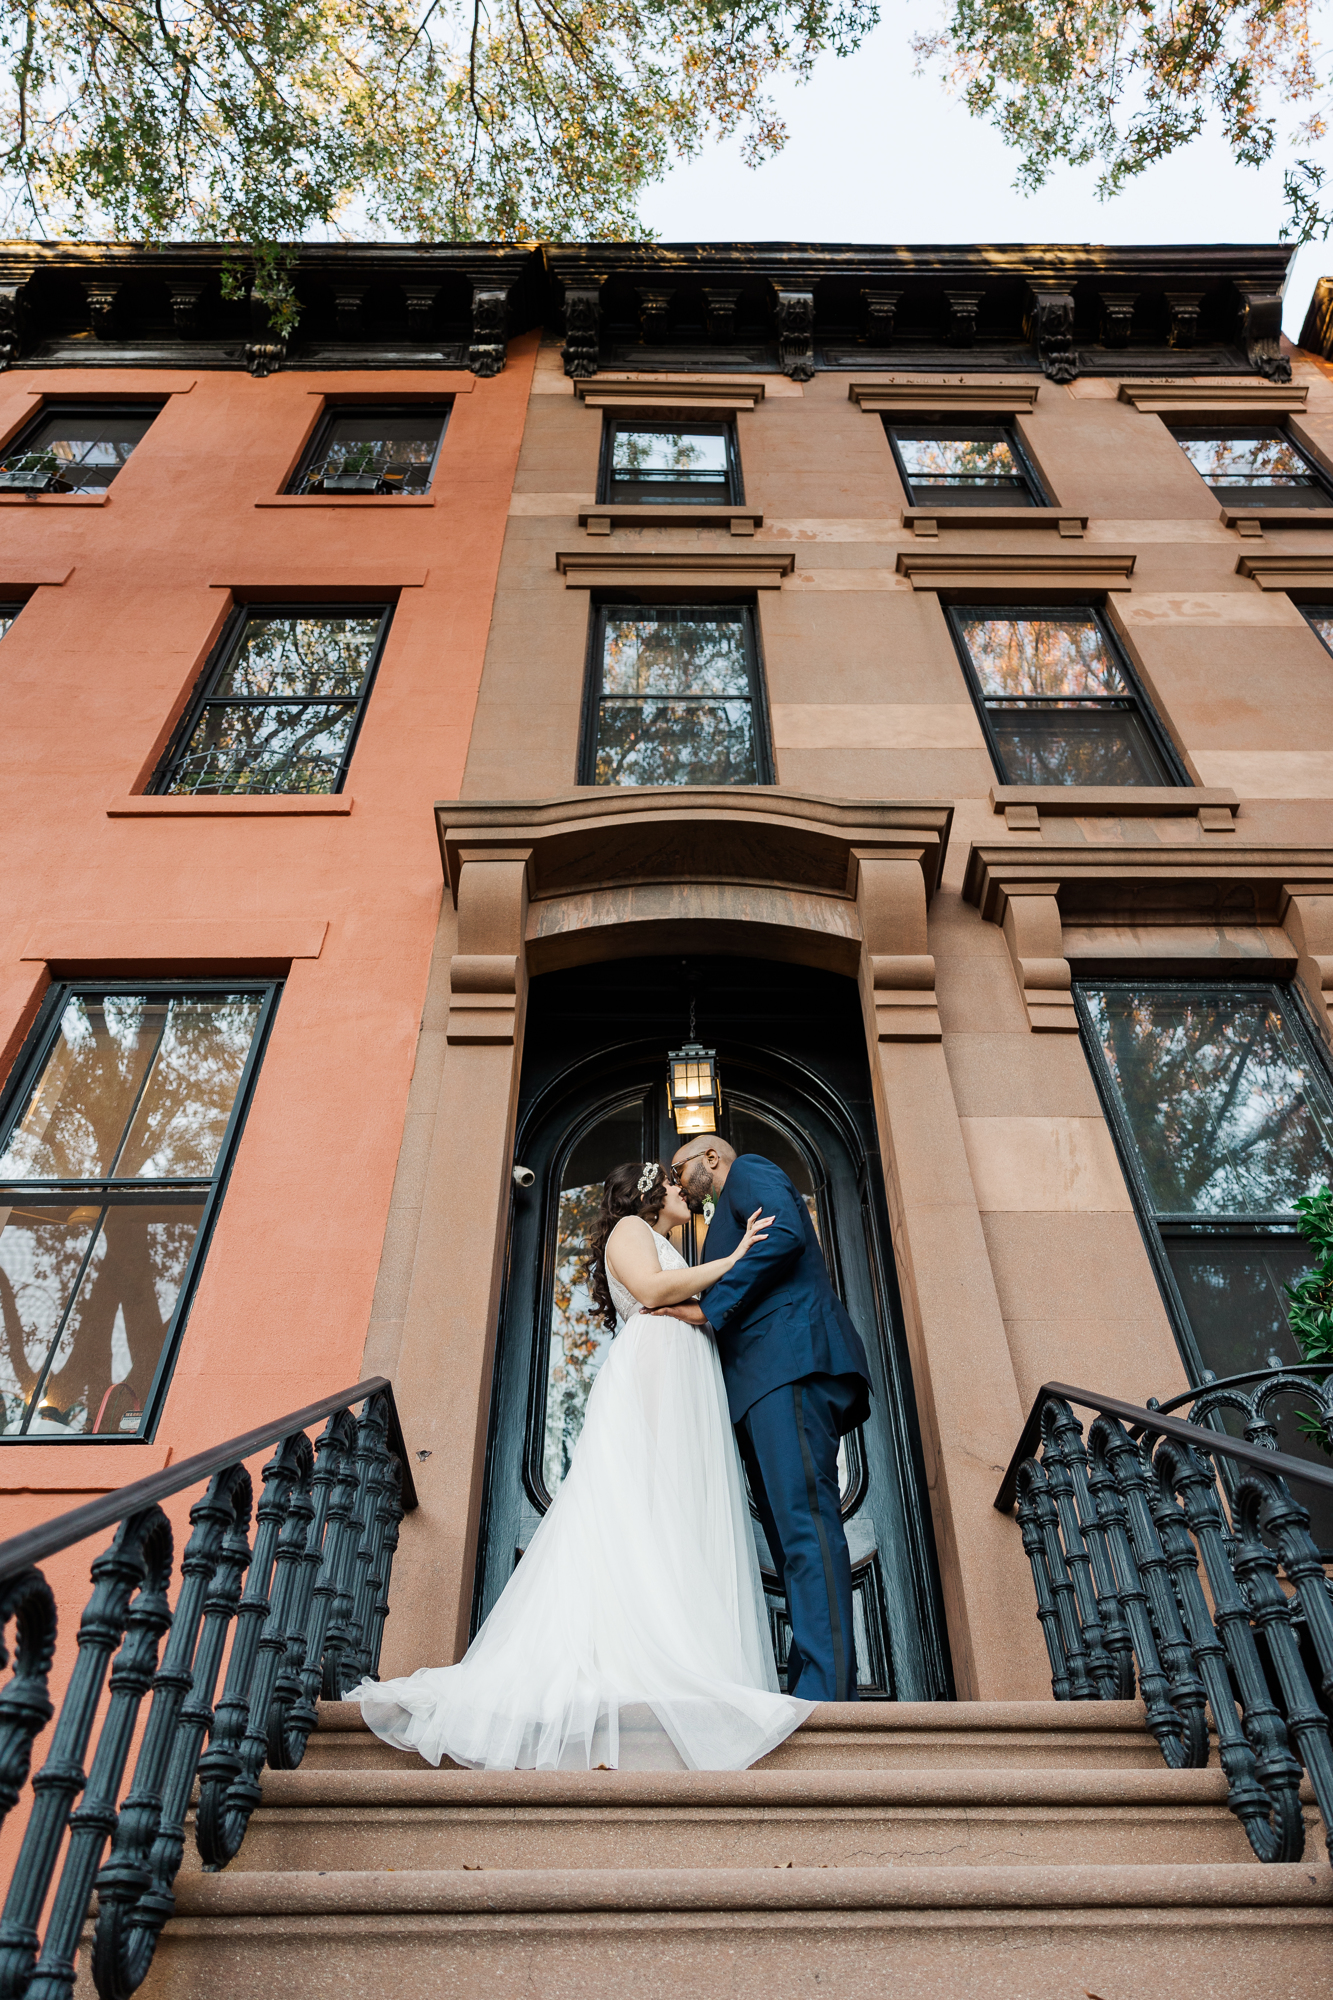 Iconic Deity Wedding Photography at Unique Event Space in Downtown Brooklyn in Autumn